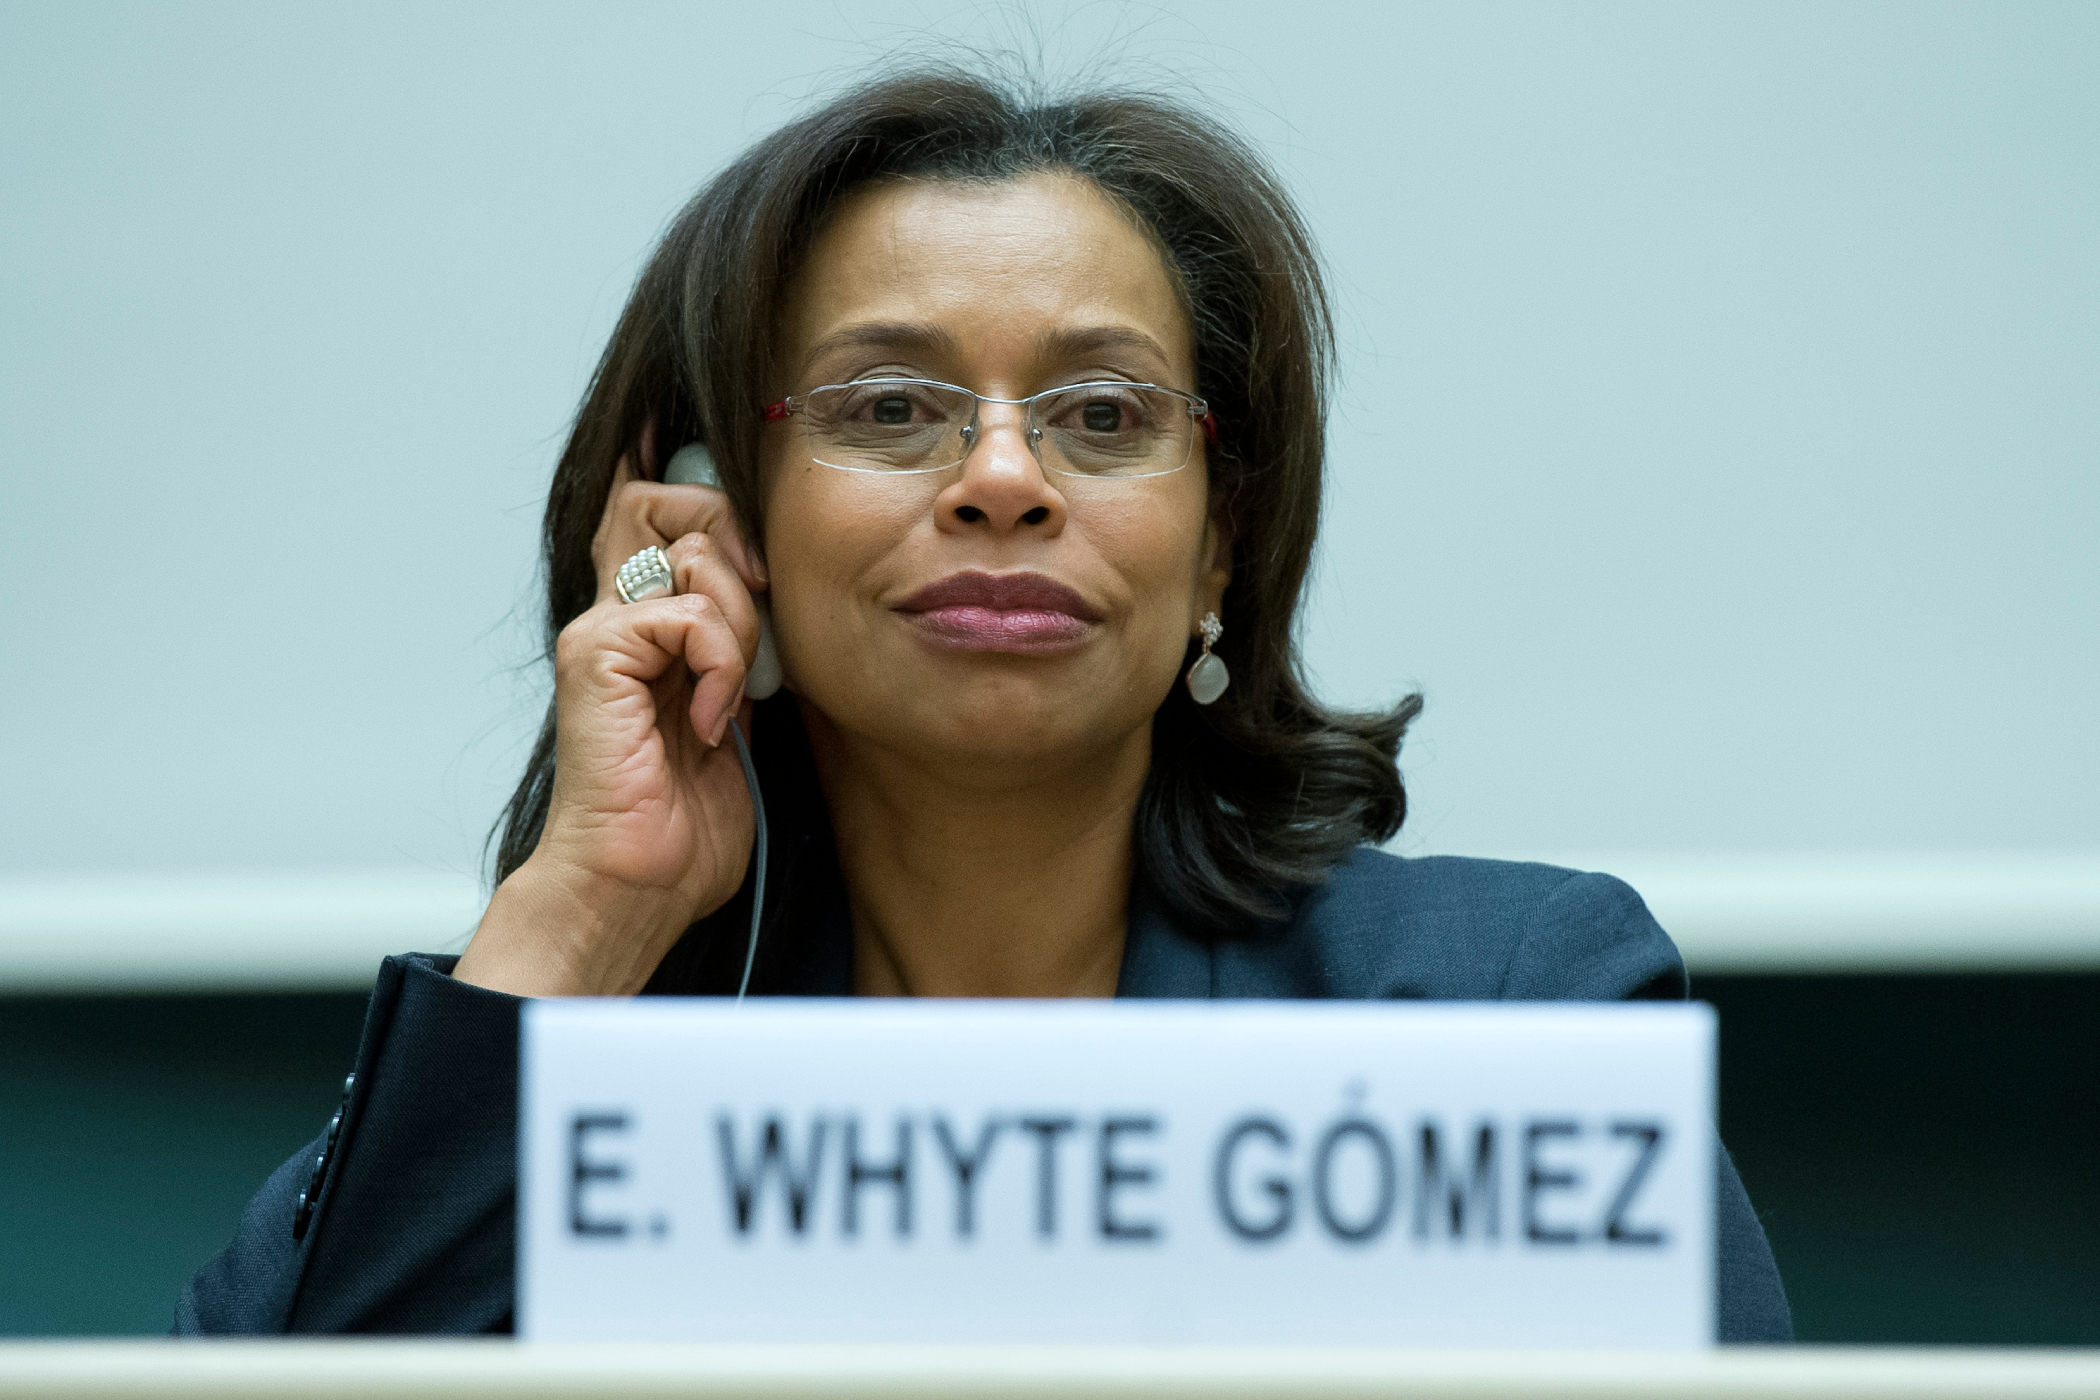 Ambassador Elayne Whyte Goméz during a meeting of a UN Working Group on nuclear disarmament in Geneva, 22 February 2016. Source: UN Photo by Jean-Marc Ferré, flickr.com.